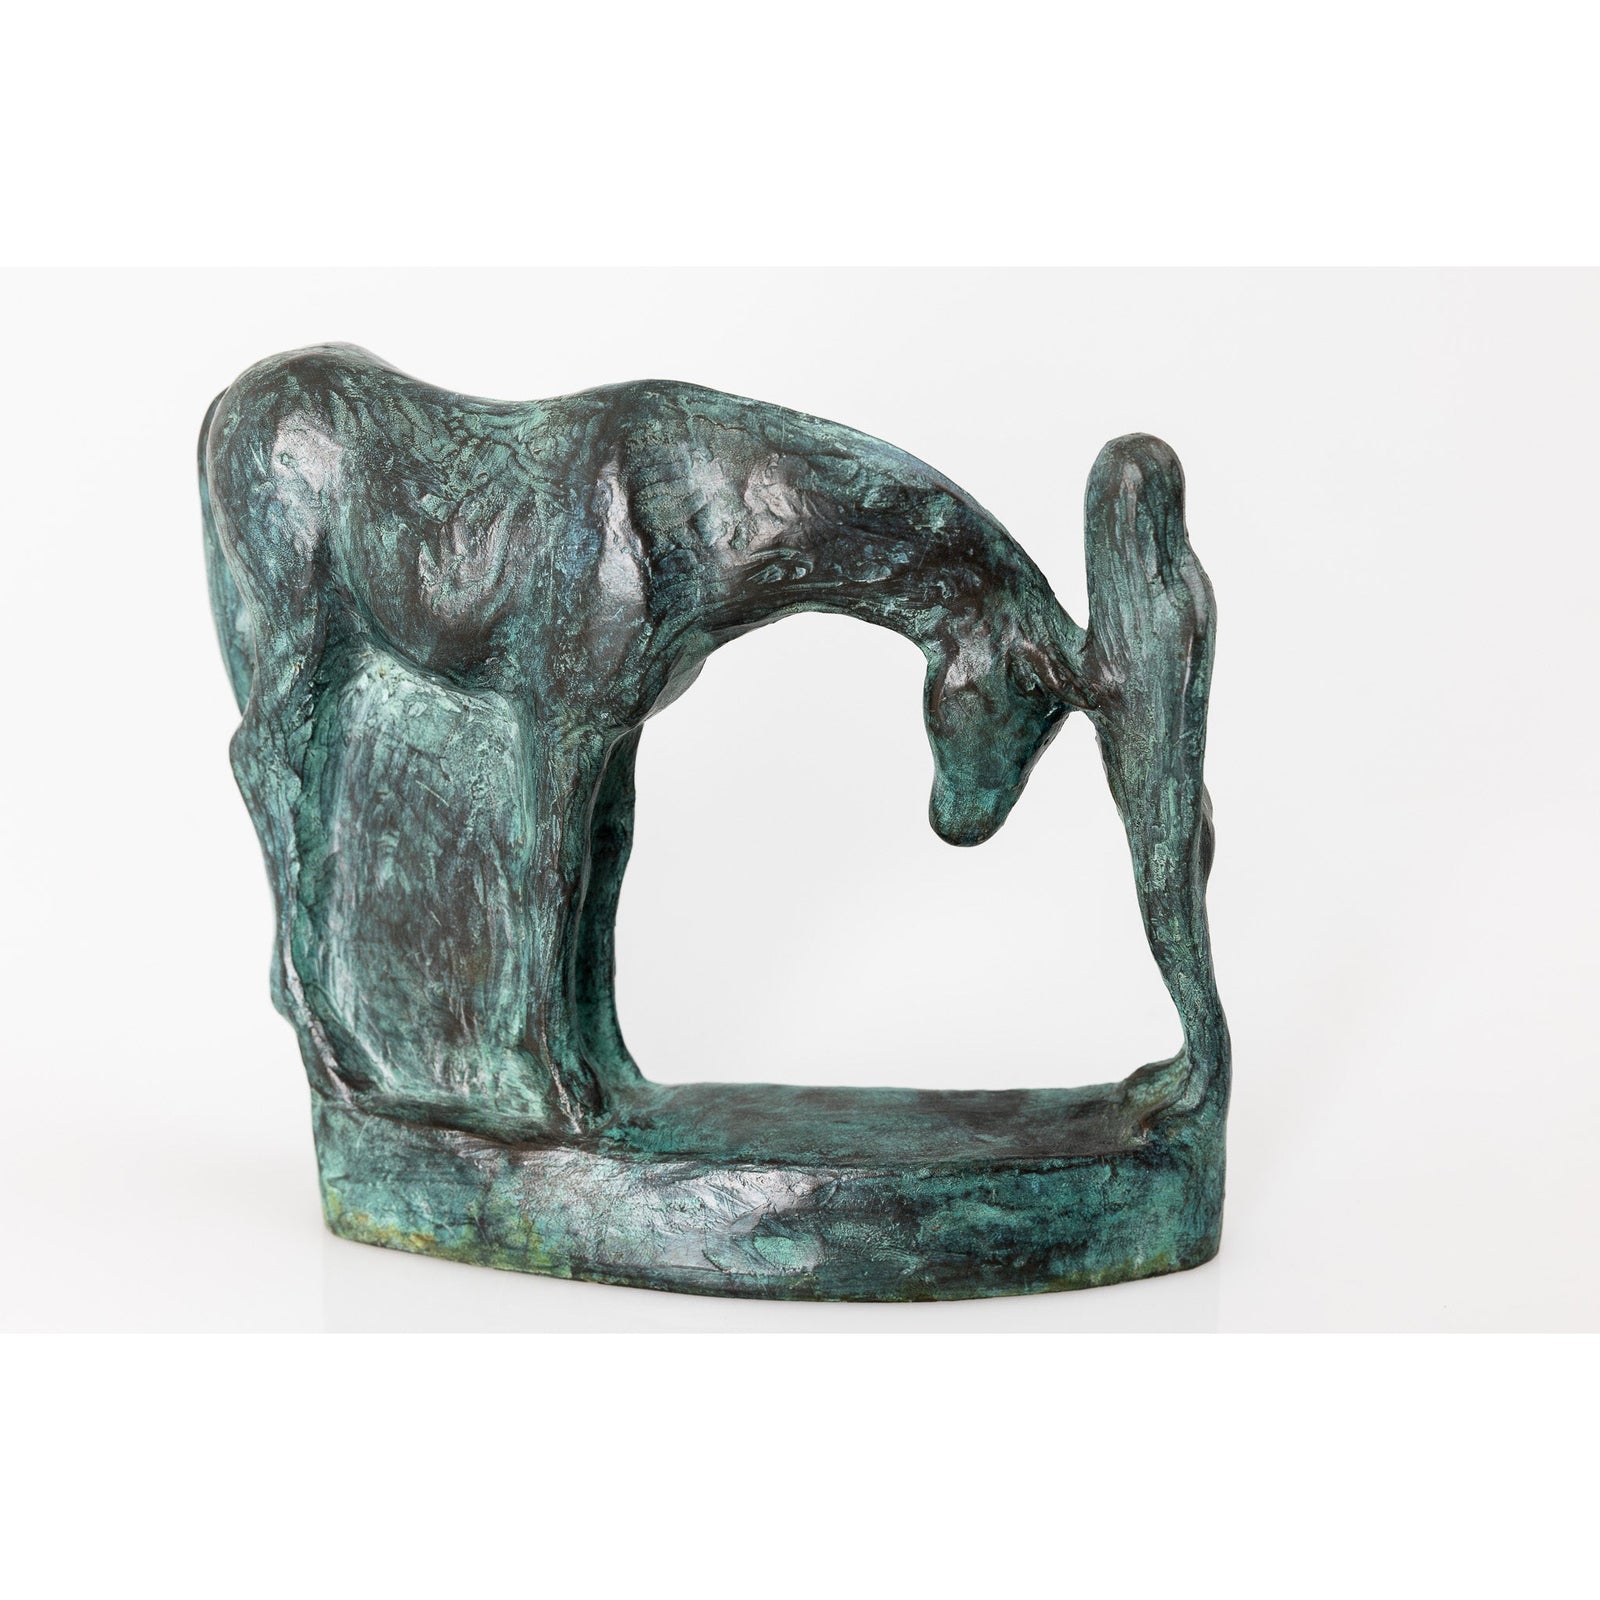 'Standing' sculpture by Sophie Howard, available at Padstow Gallery, Cornwall